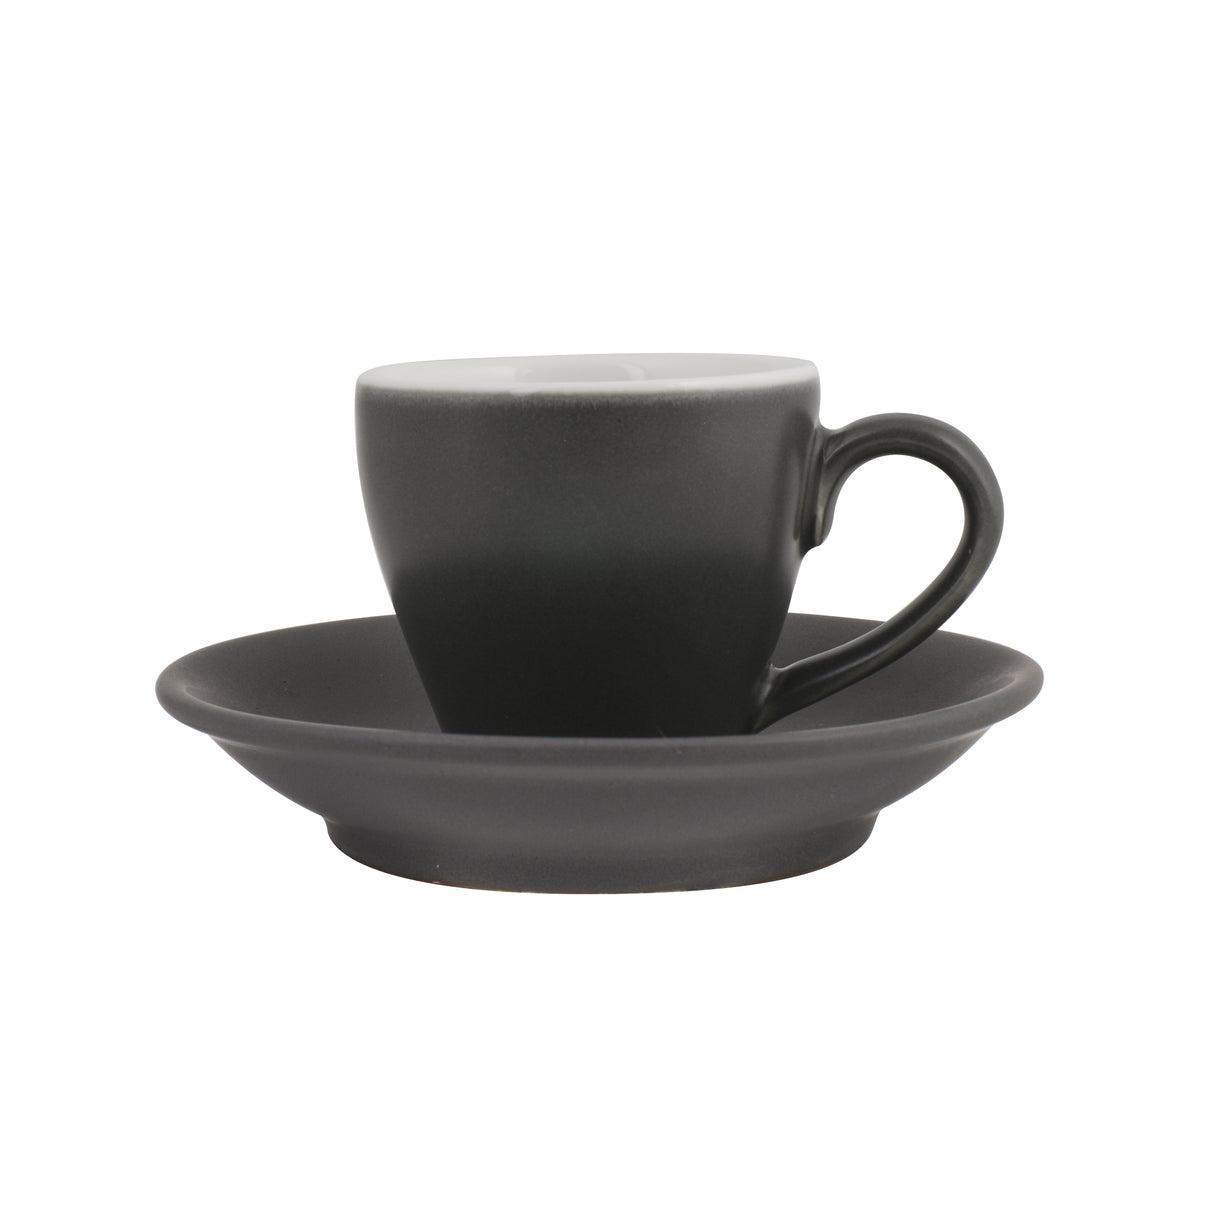 Espresso Cup - Slate, 85ml, Cono from Bevande. made out of Porcelain and sold in boxes of 6. Hospitality quality at wholesale price with The Flying Fork! 